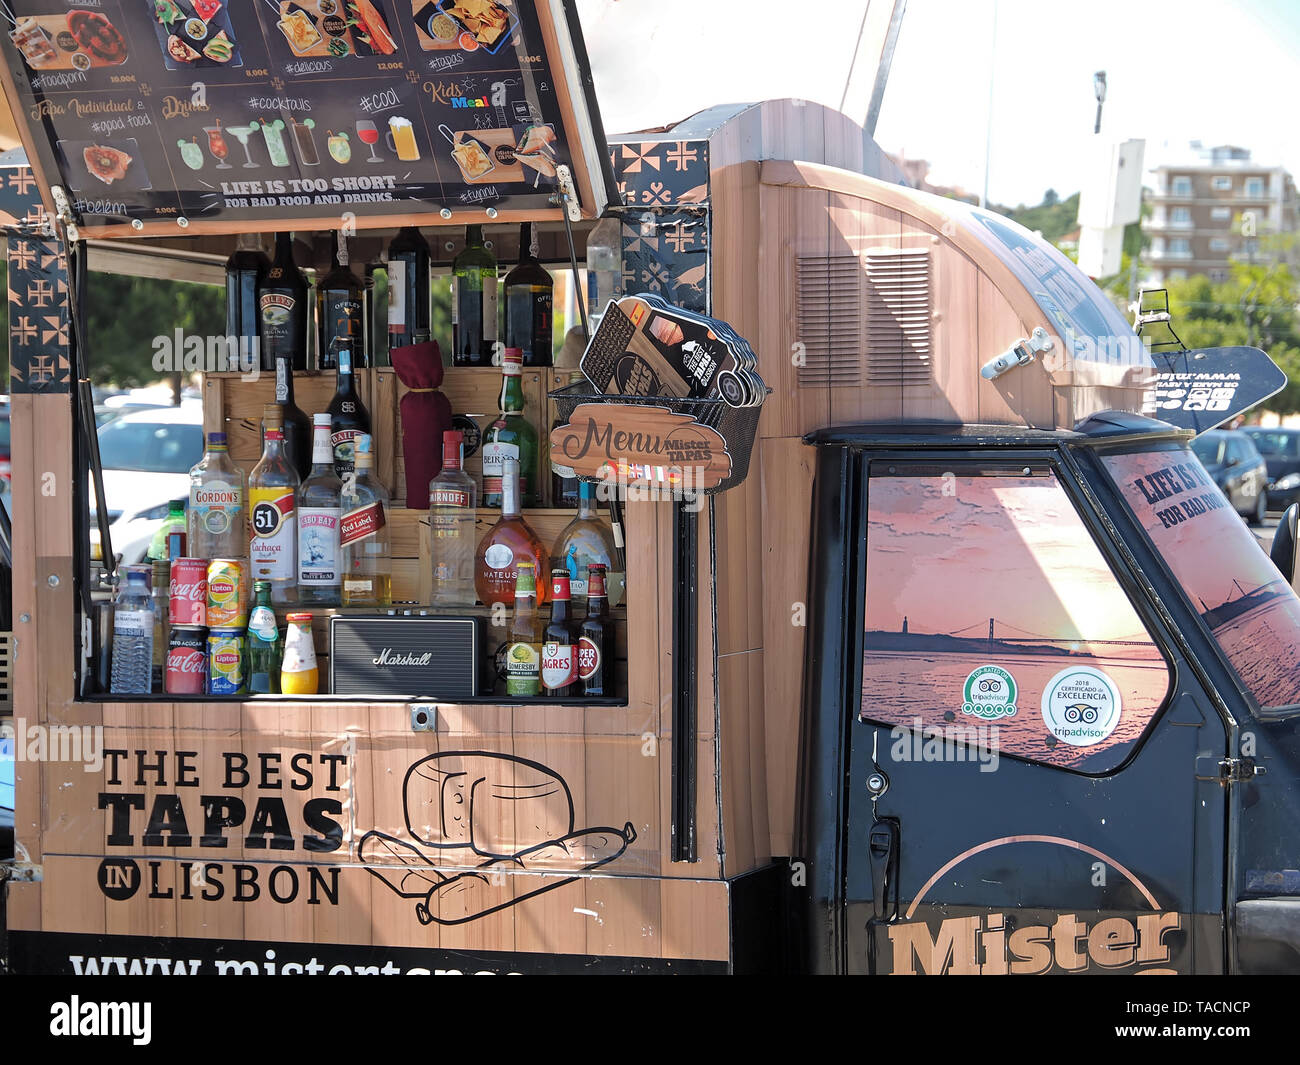 Food Truck With Tapas And Drinks In Lisbon In Portugal Stock Photo Alamy